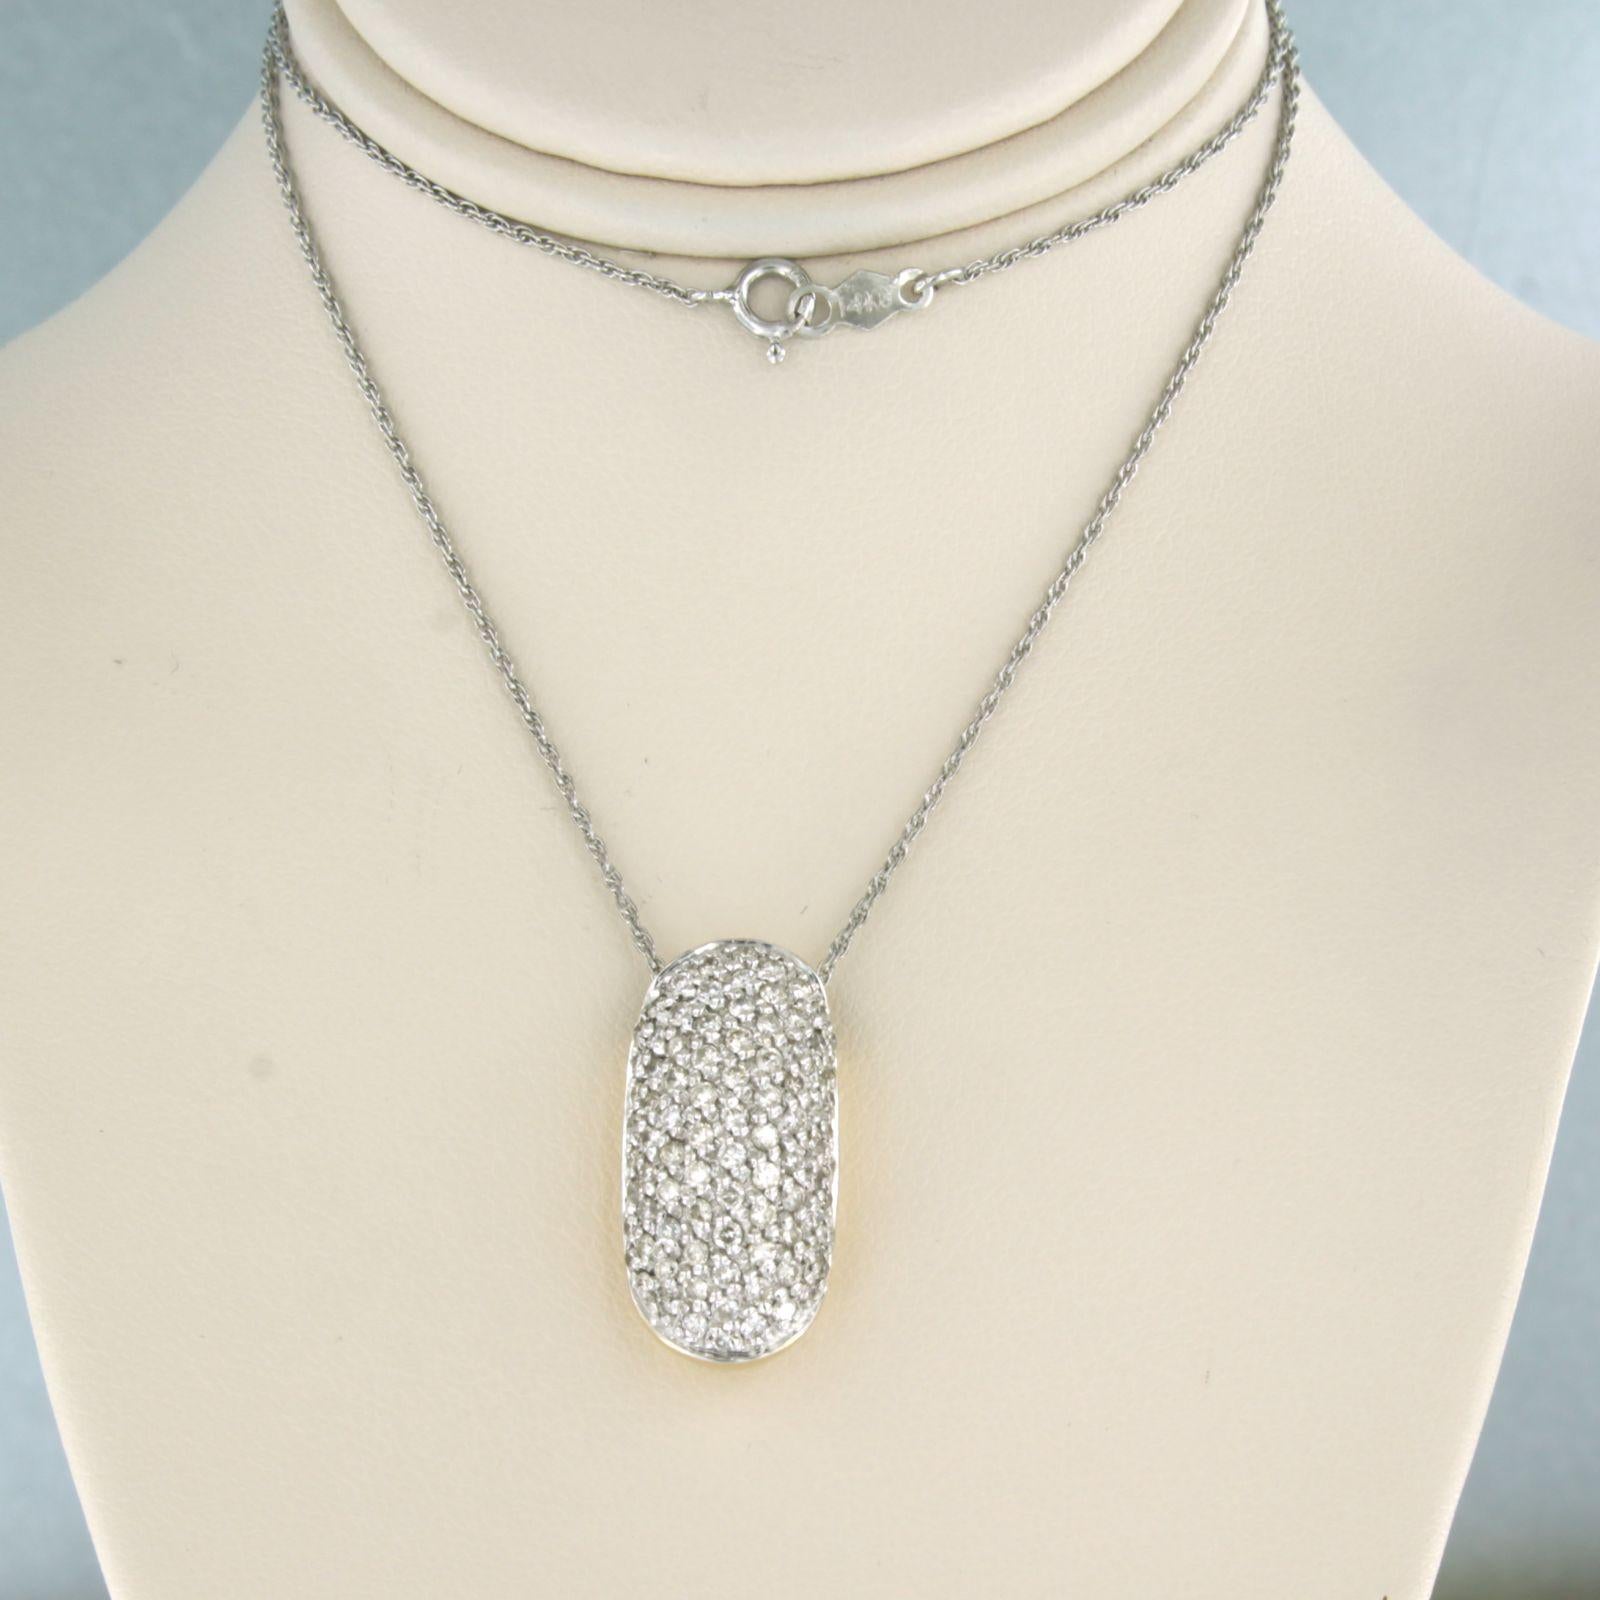 14k white gold necklace with a bicolor pendant set with brilliant cut diamonds up to. 1.00ct - F/G - VS/SI - 40 cm long

detailed description:

necklace is 40 cm long and 0.8 mm wide

size of the pendant is approximately 2.2 cm by 1.1 cm wide

total